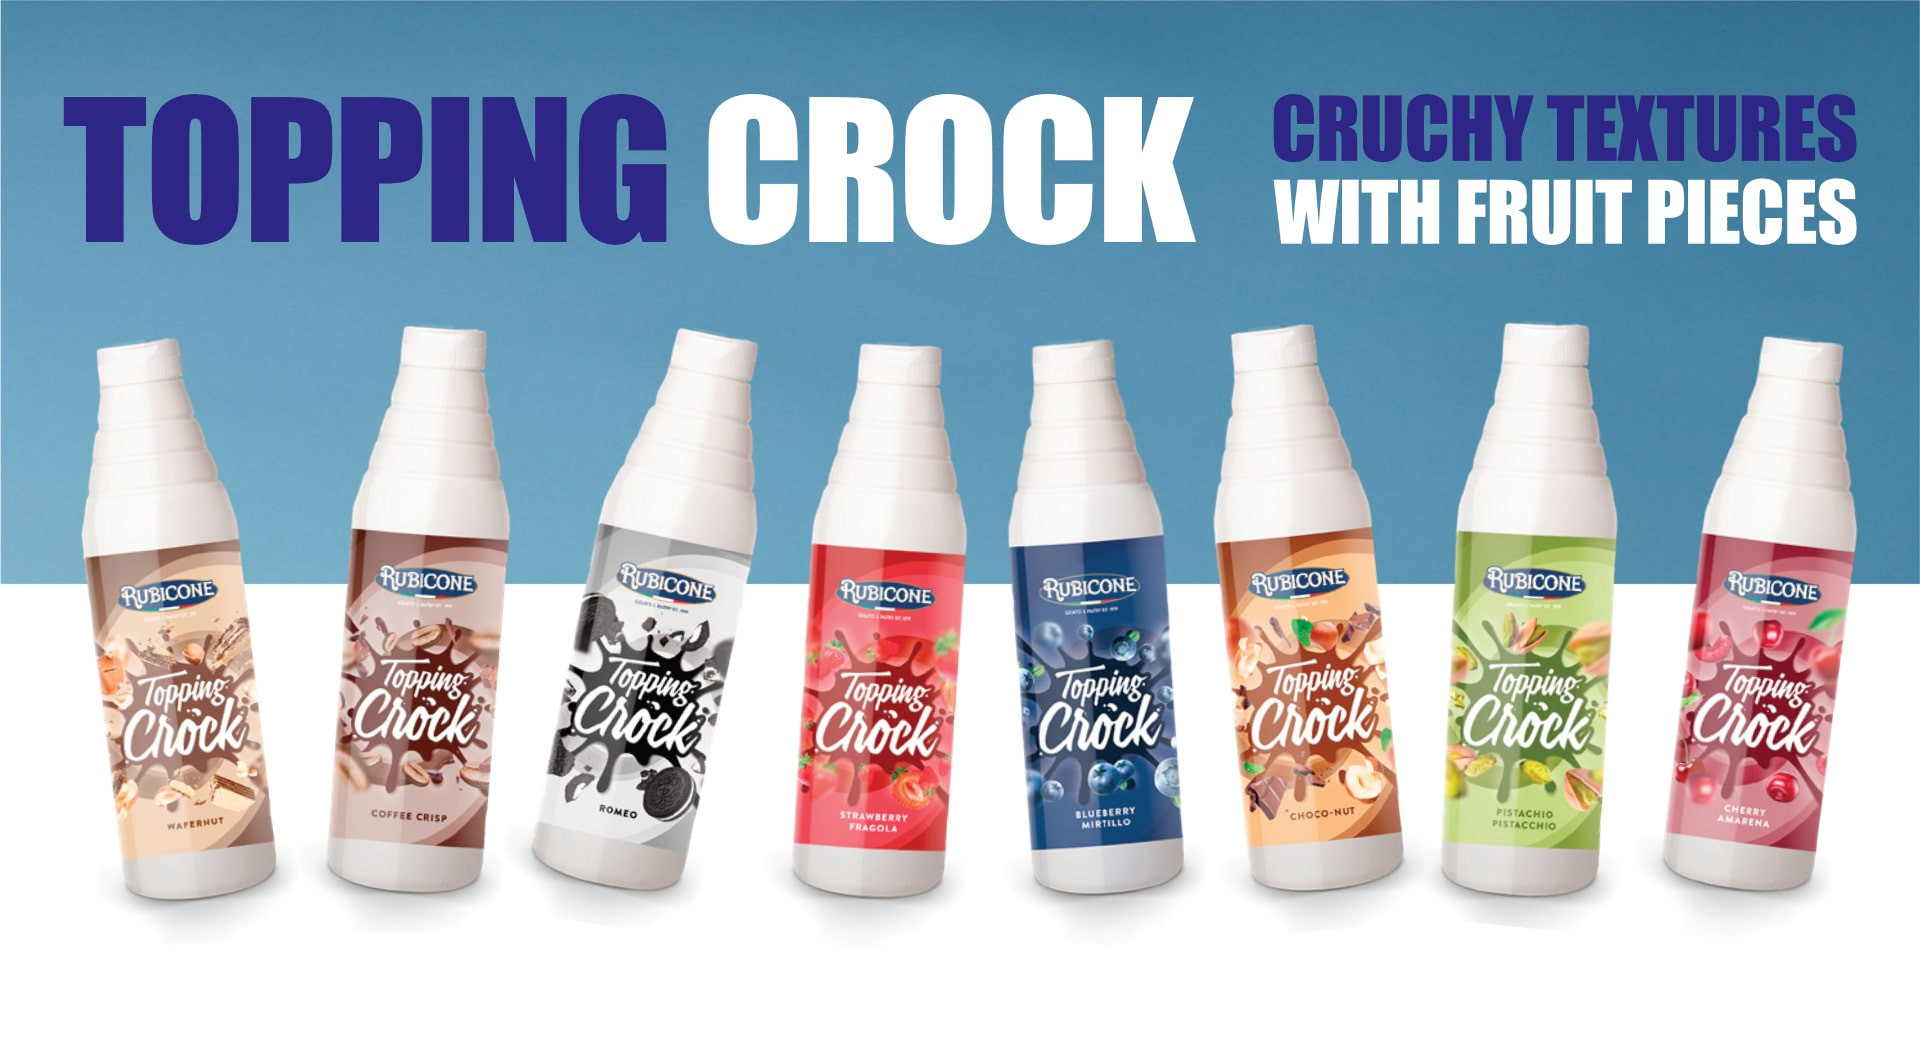 RUBICONE TOPPING CROCK - A NEW TEXTURE FOR YOUR ICE CREAM